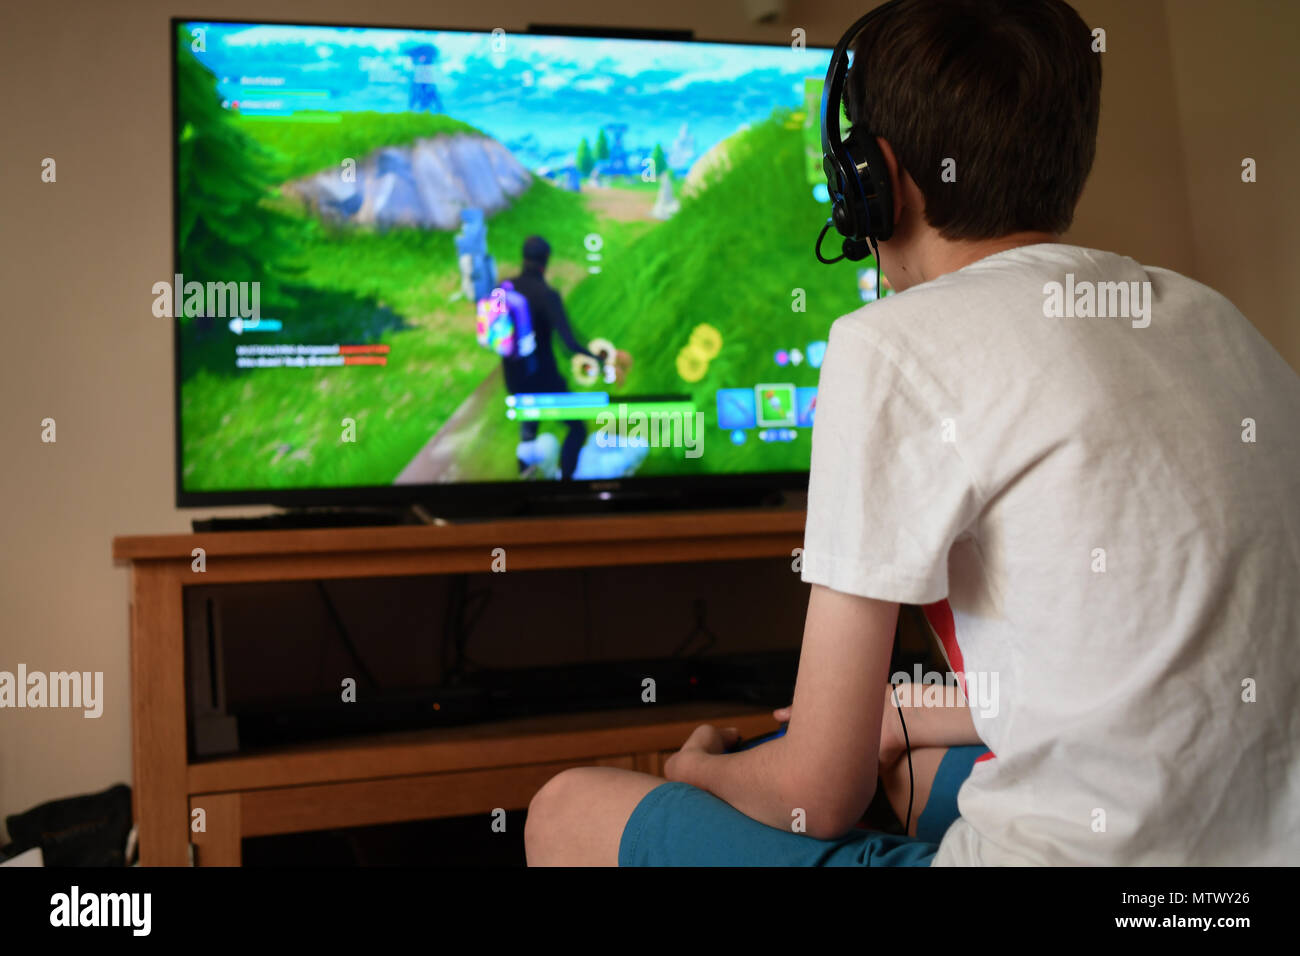 a teenage boy age 13plays fortnite computer game on the ps4 using a headset to communicate with other players in his squad - playing fortnite on ps4